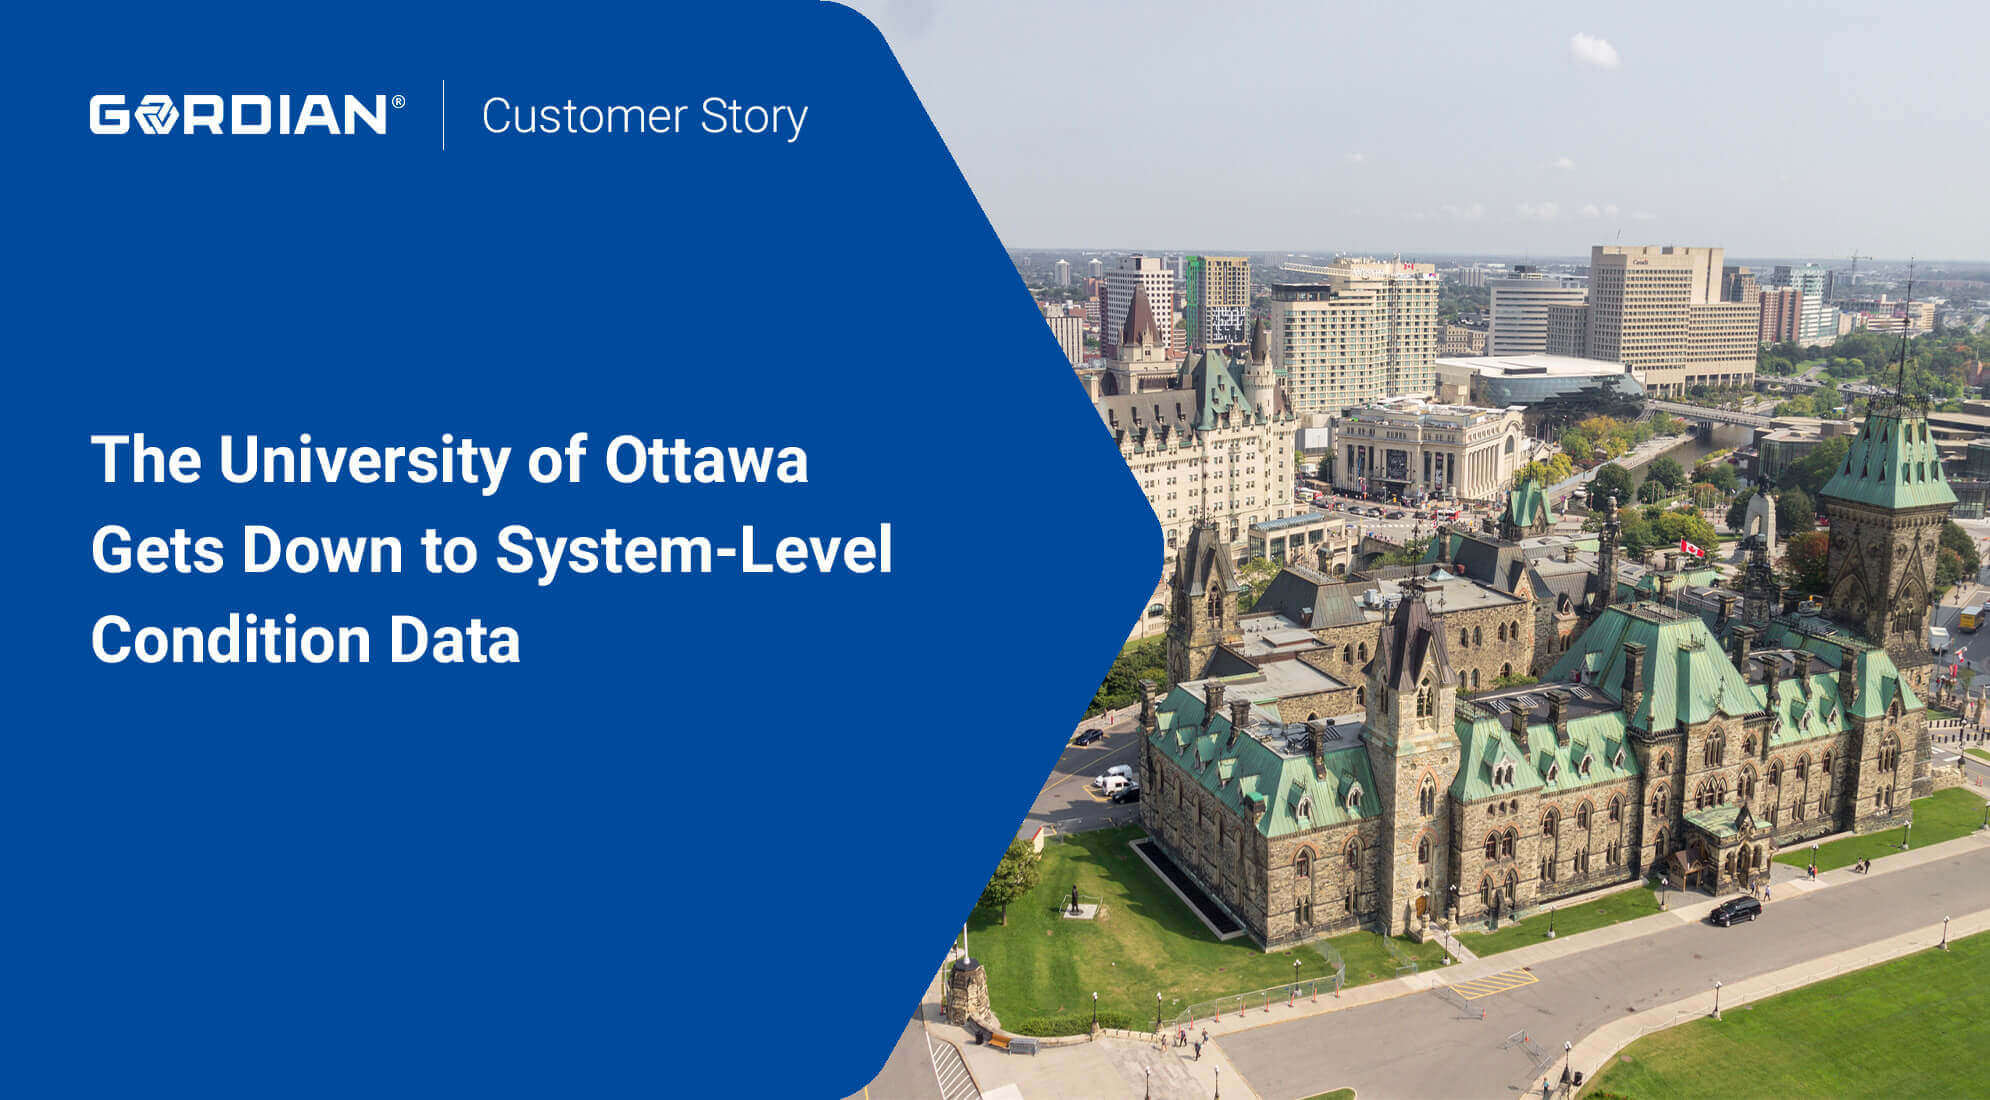 The University of Ottawa Gets Down to System-Level Condition Data 2